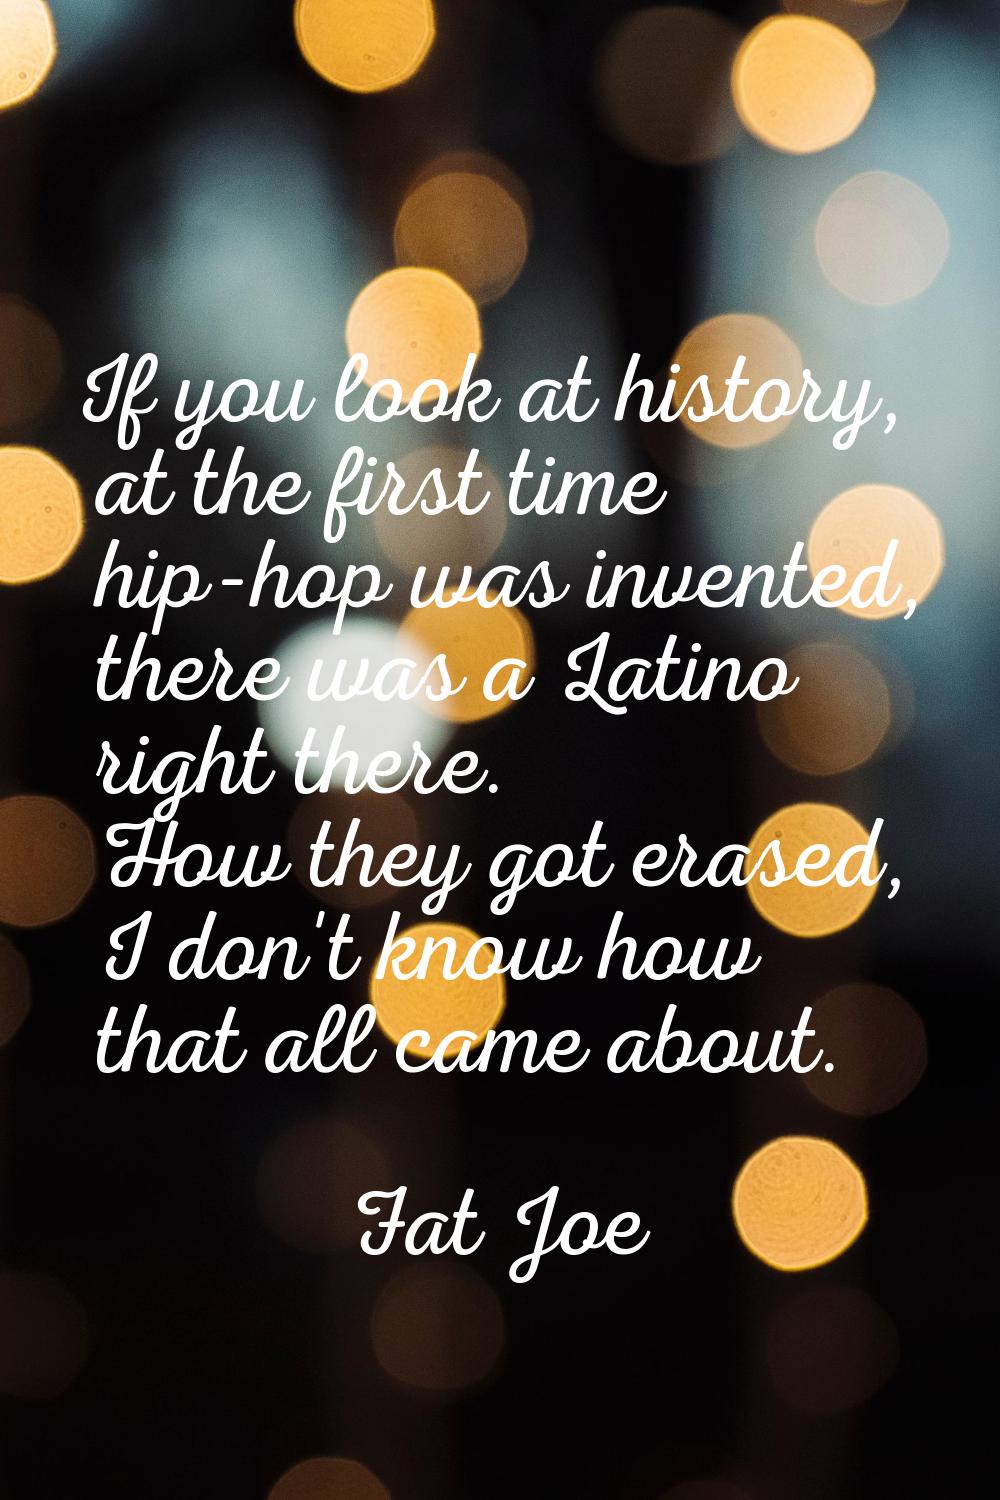 If you look at history, at the first time hip-hop was invented, there was a Latino right there. How